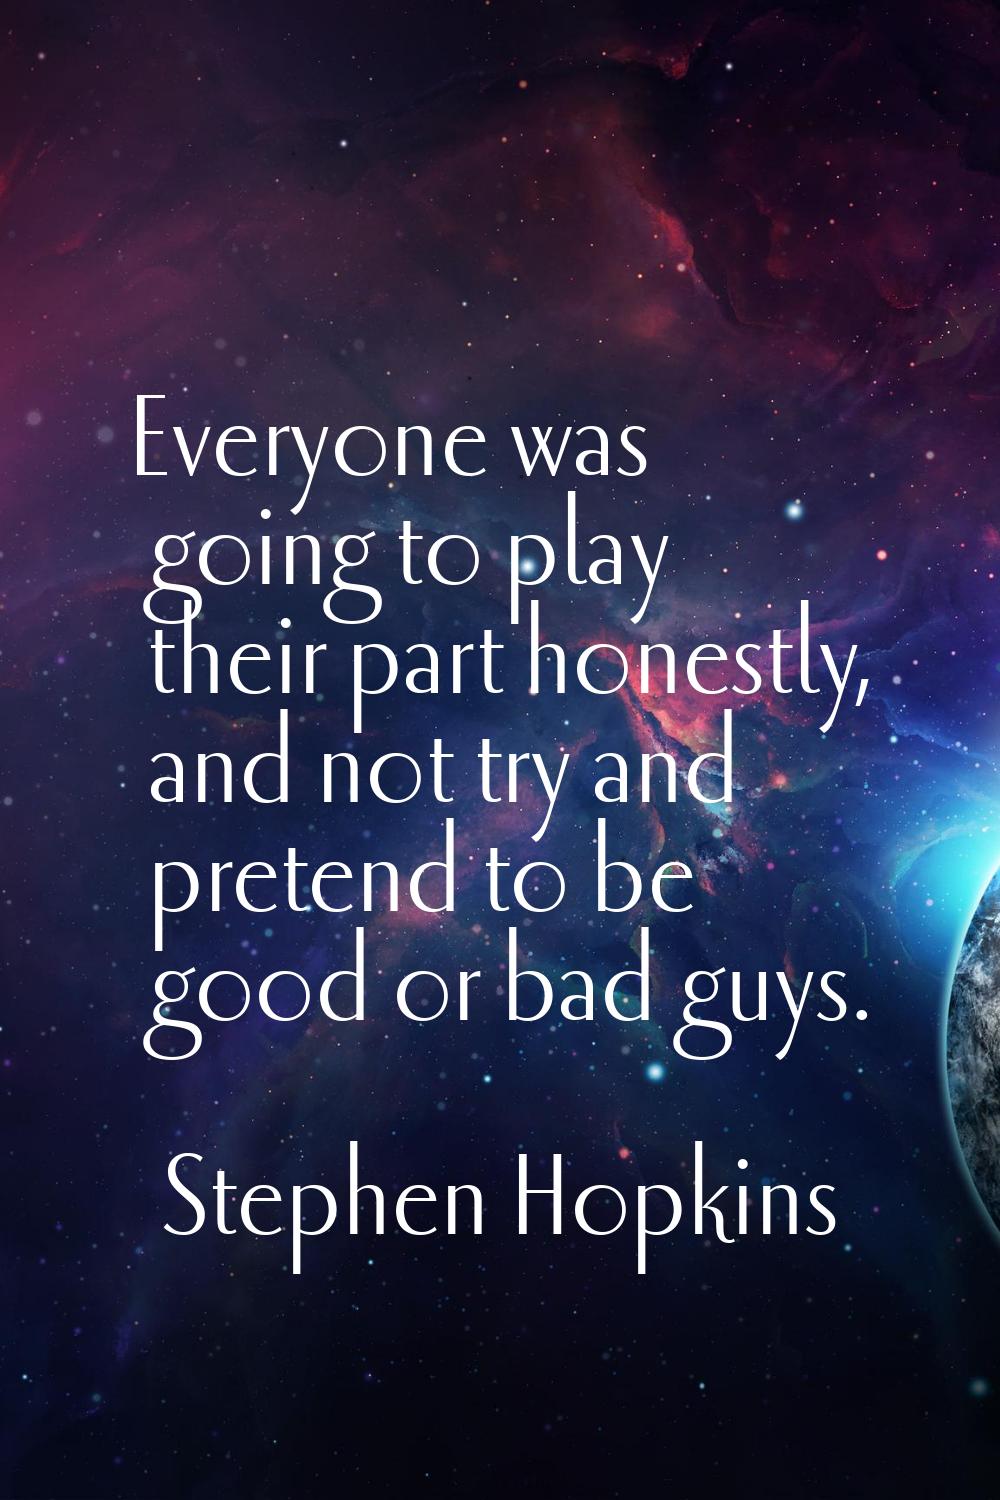 Everyone was going to play their part honestly, and not try and pretend to be good or bad guys.